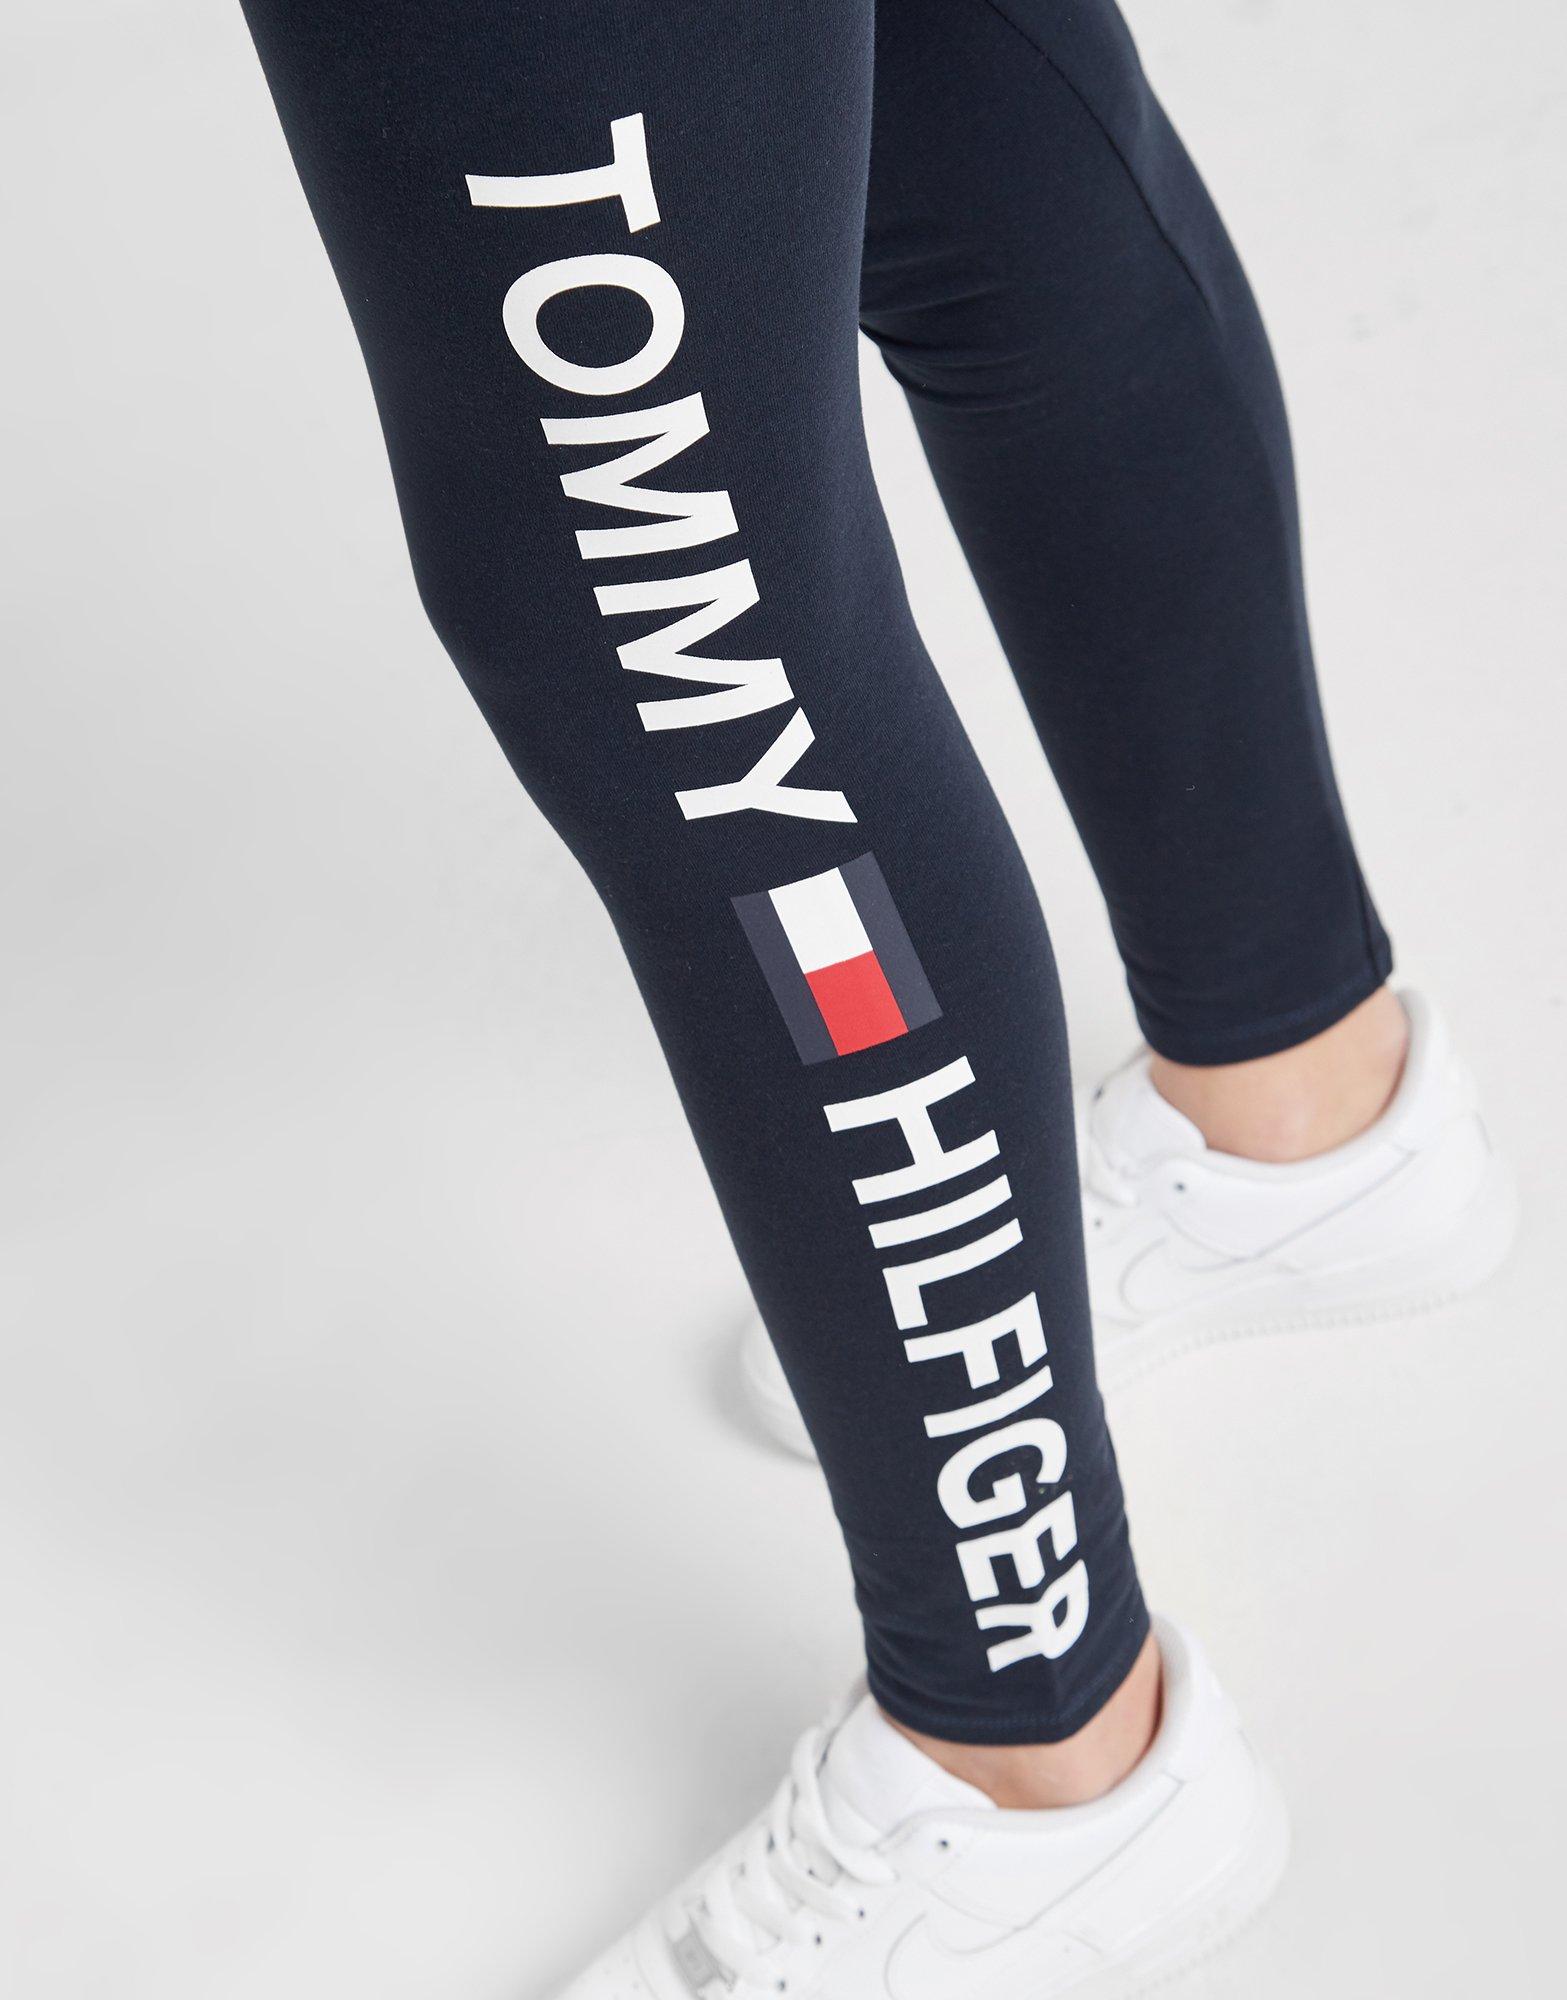 tommy hilfiger leggings and shirt 